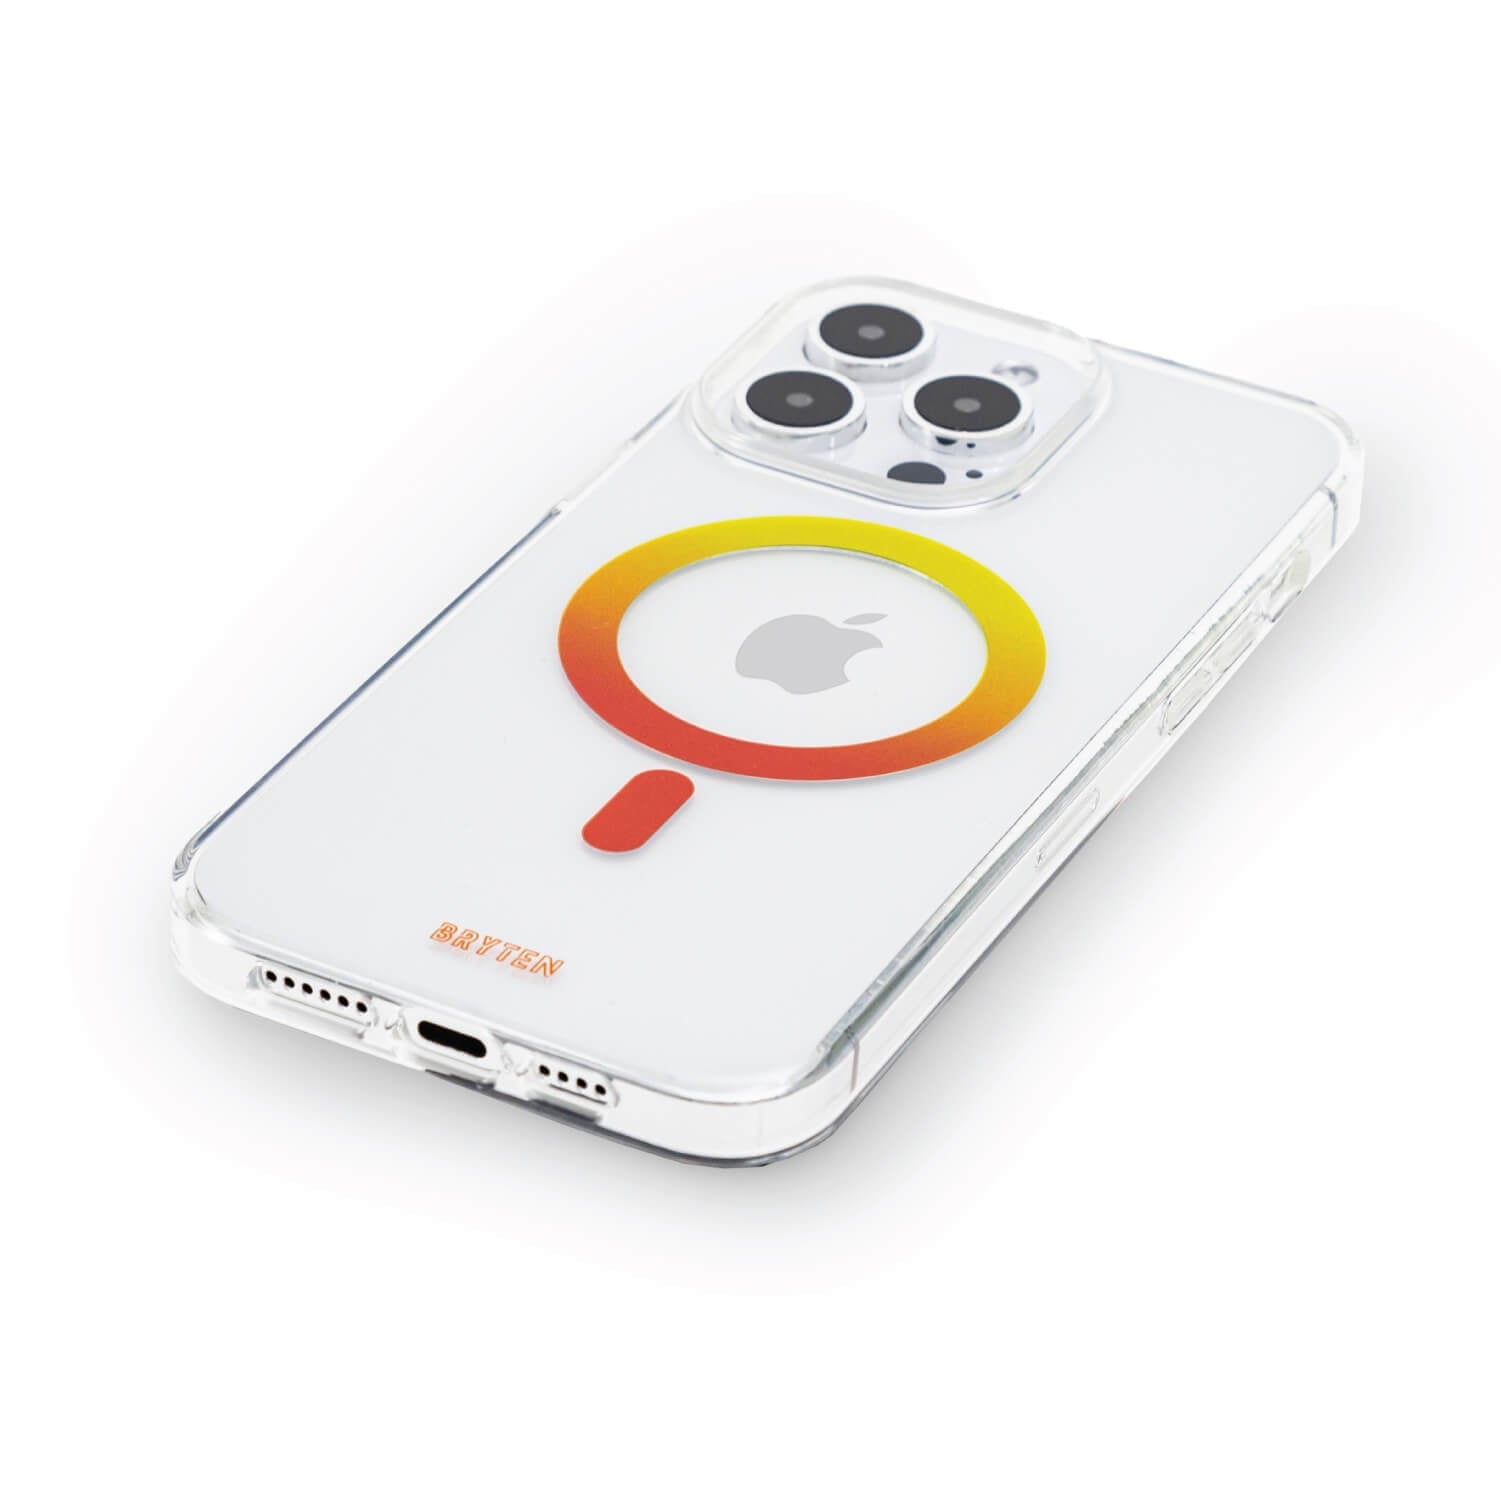 The iPhone 15 MagFx MagSafe Case - Bryten by Raptic features a Bryten rainbow colored button.